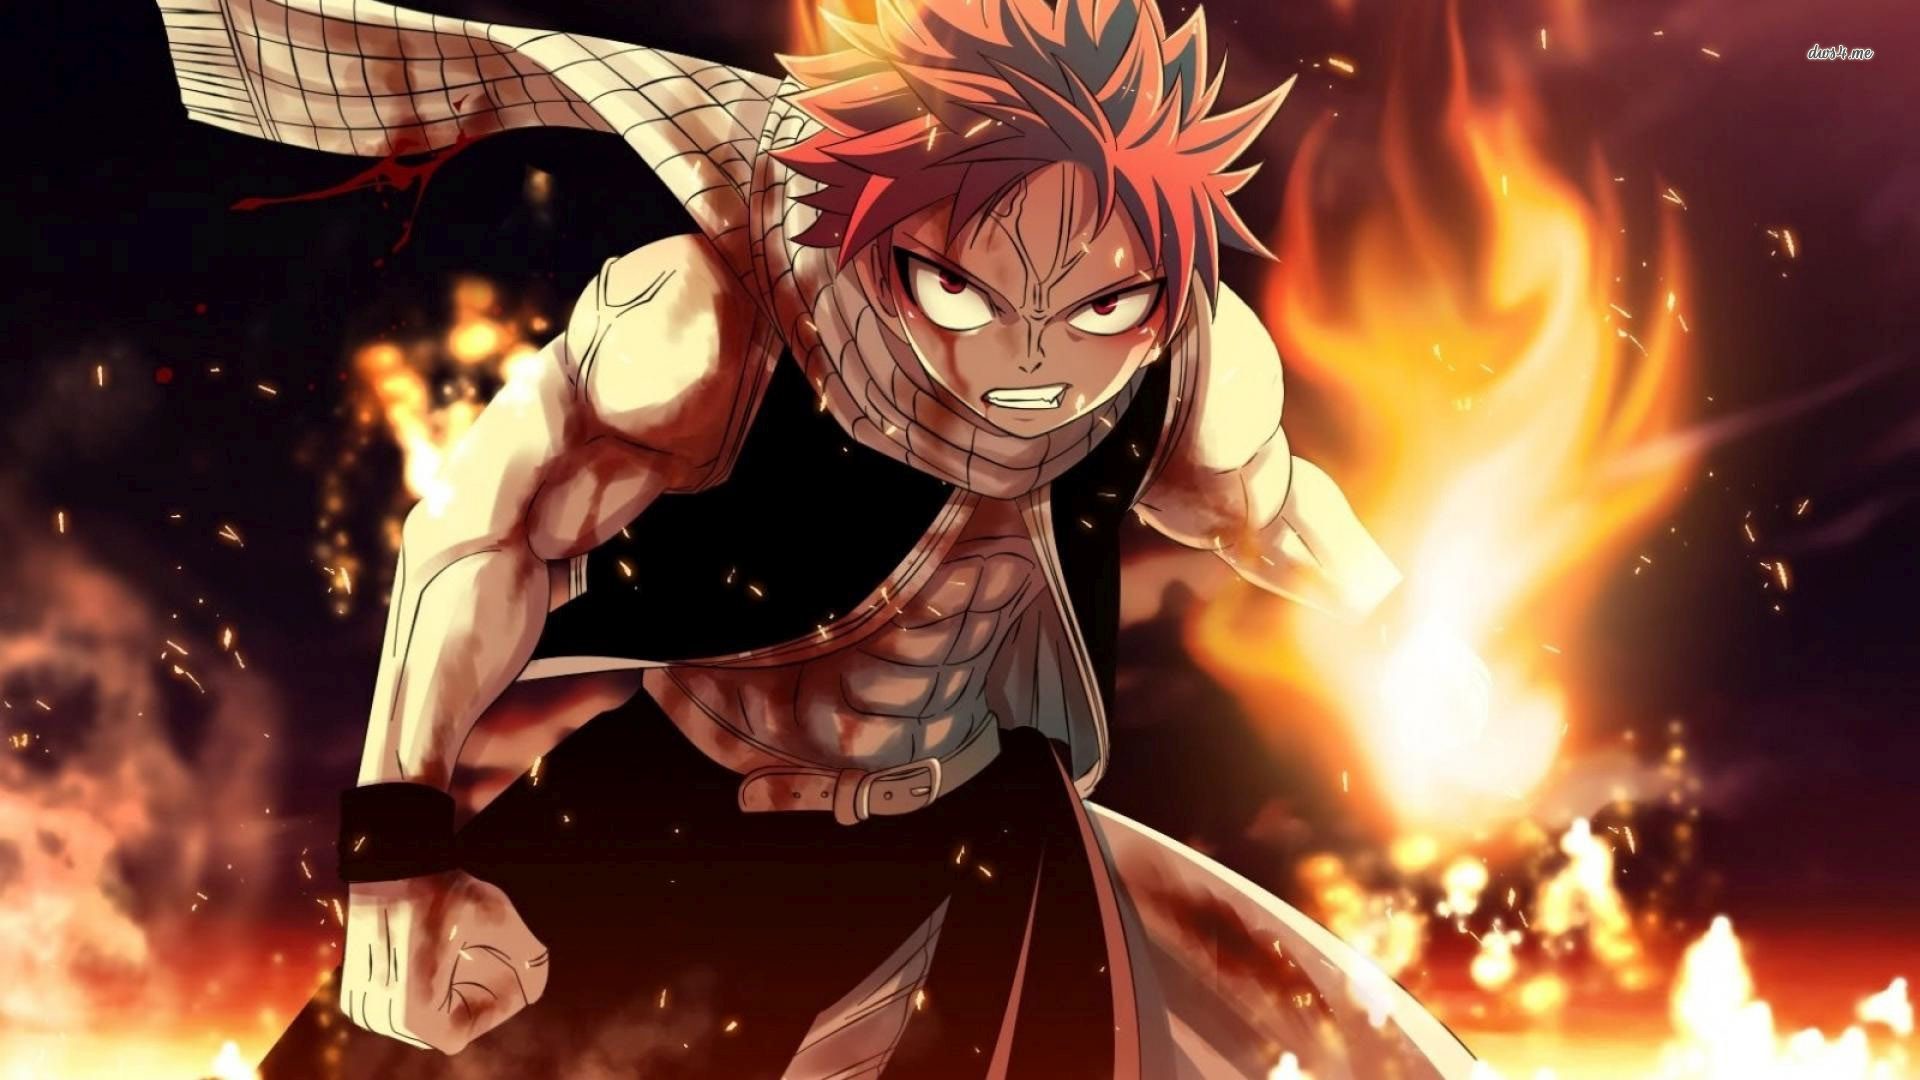 1920x1080 Collection of Fairy Tail Wallpapers on HDWallpapers Fairytail Anime Wallpapers  Wallpapers)